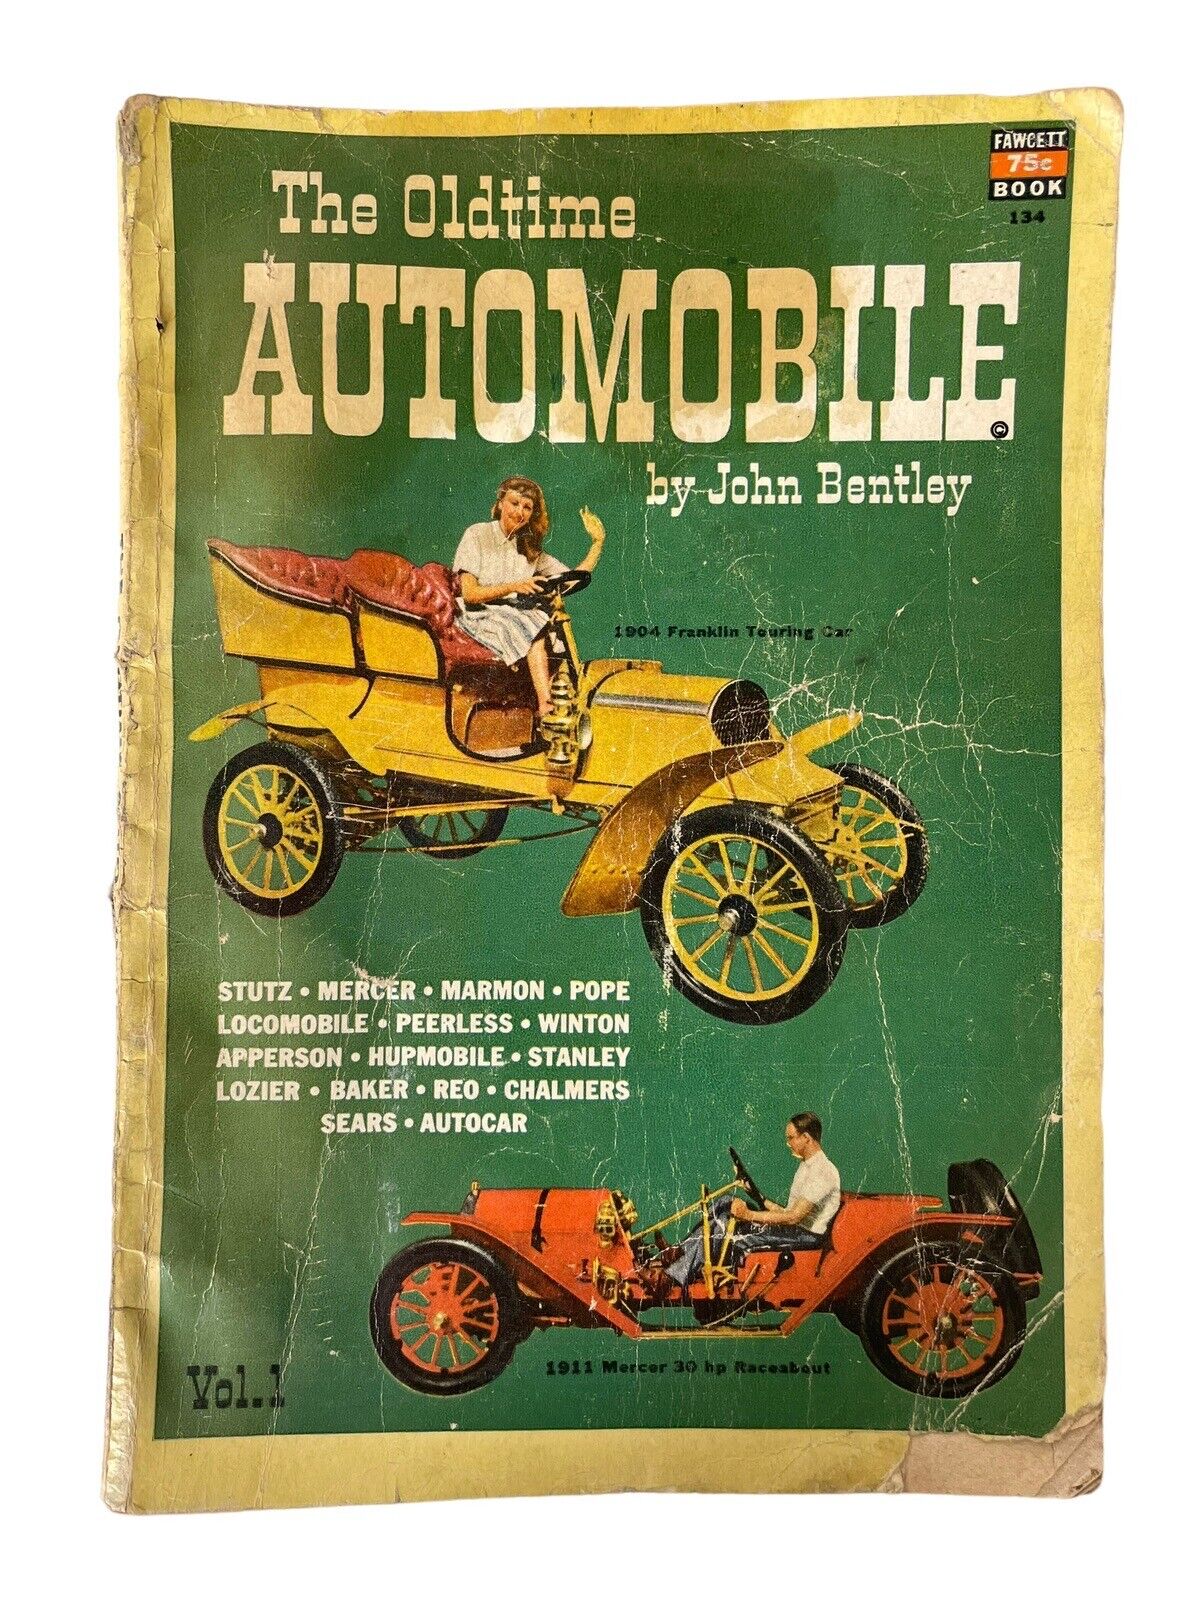 The Oldtime Automobile by John Bentley Book Volume 1 Used